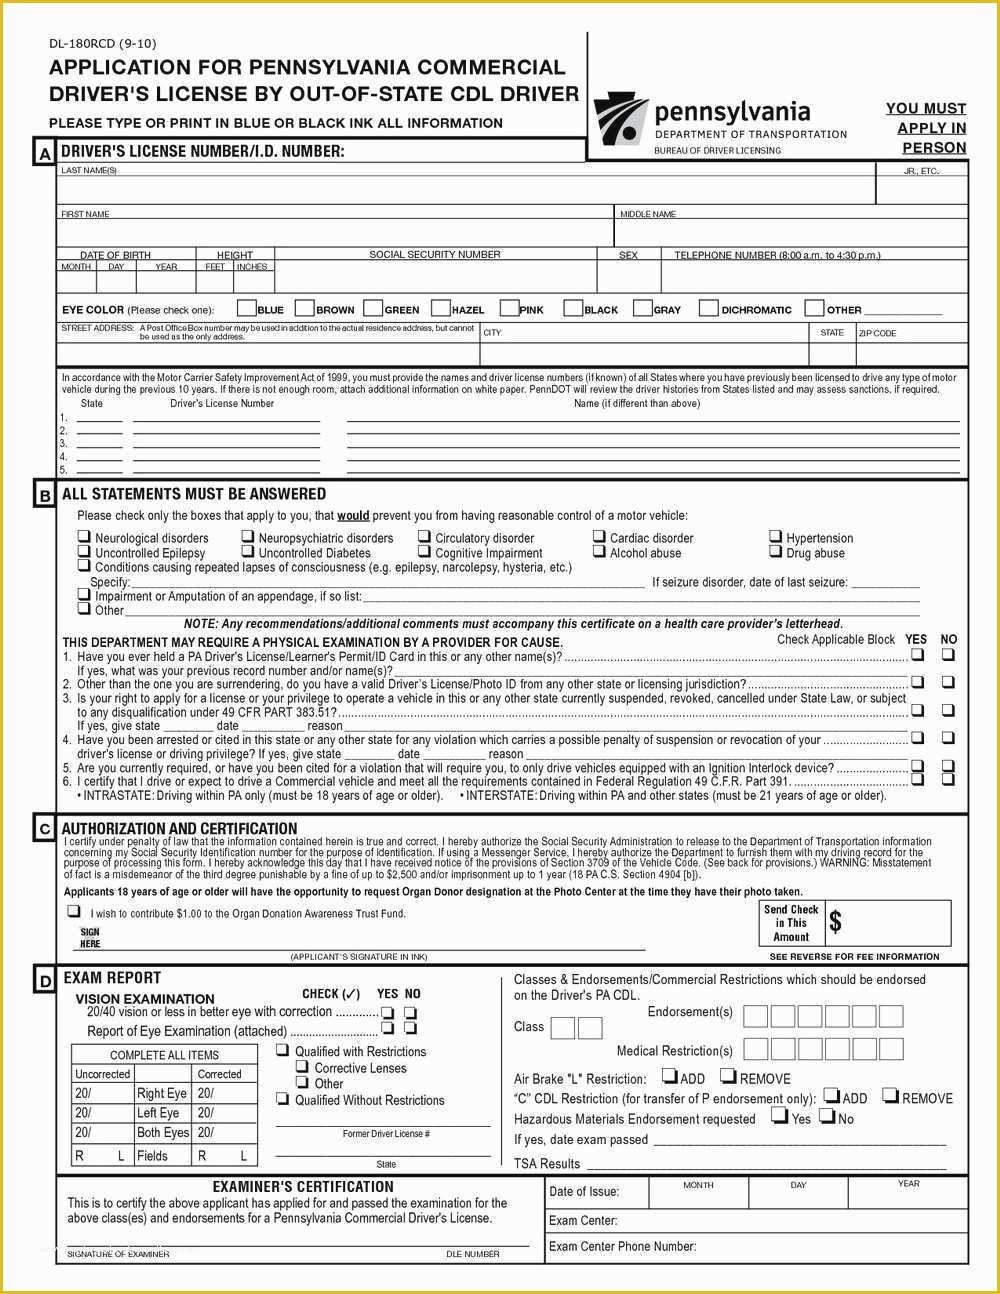 Free Cms 1500 Claim form Template Of Unique Cms 1500 Template Free